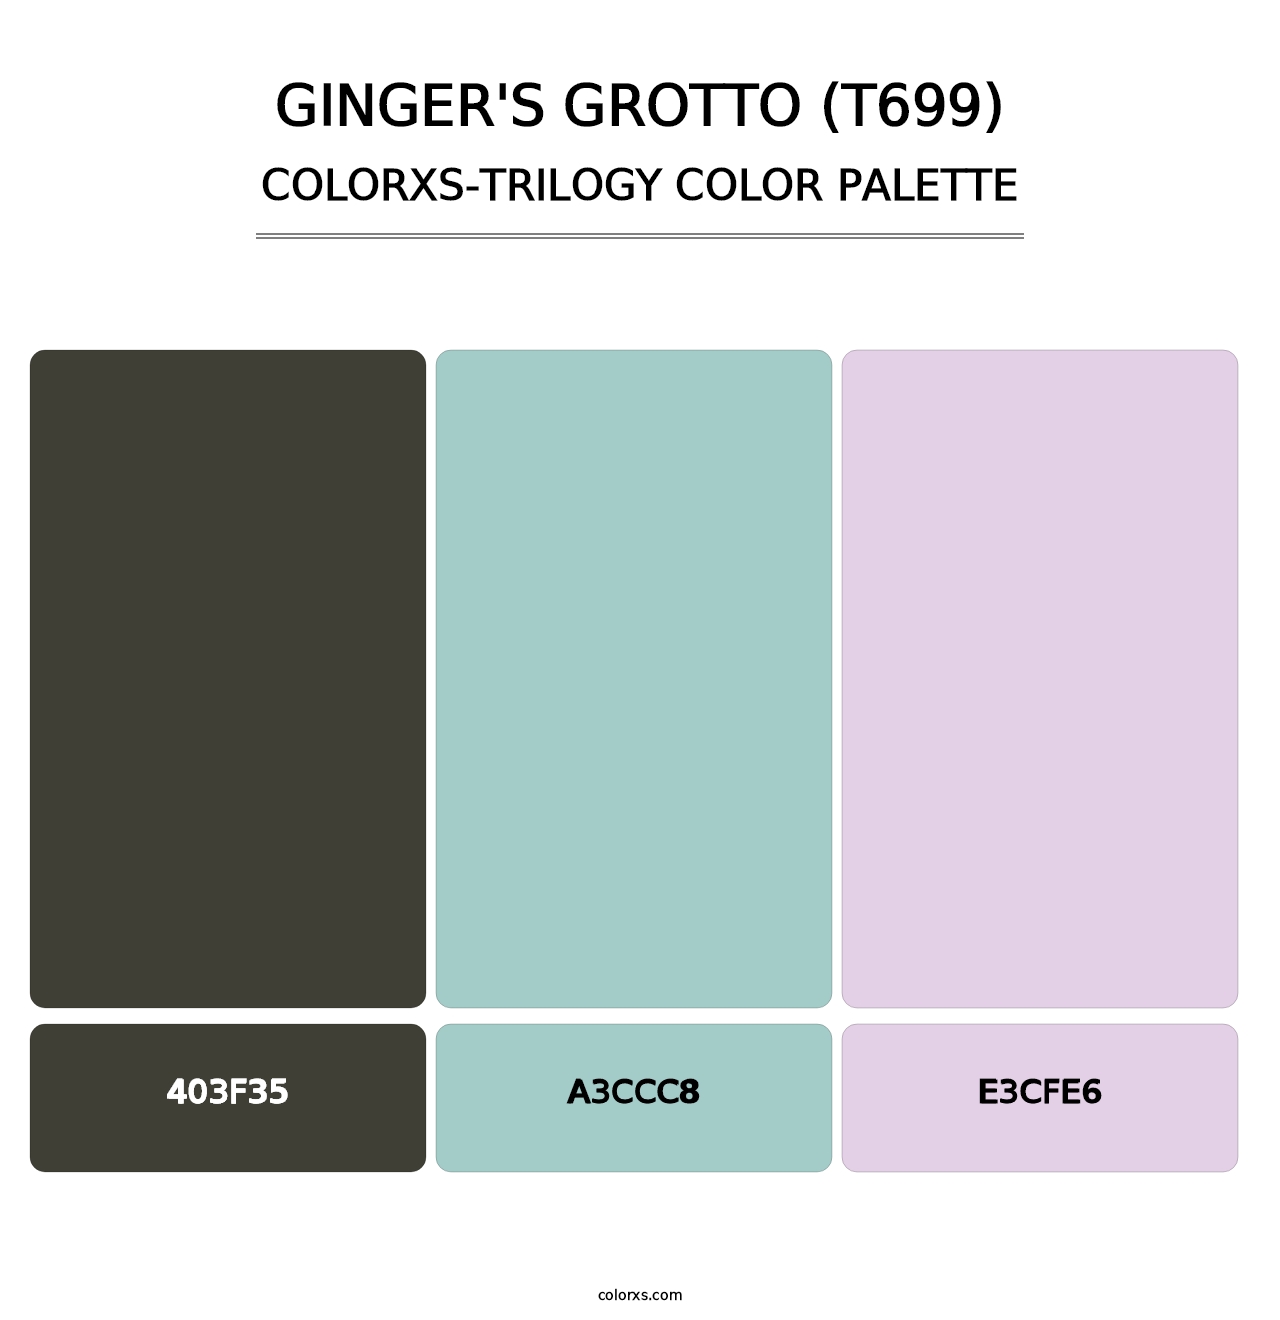 Ginger's Grotto (T699) - Colorxs Trilogy Palette